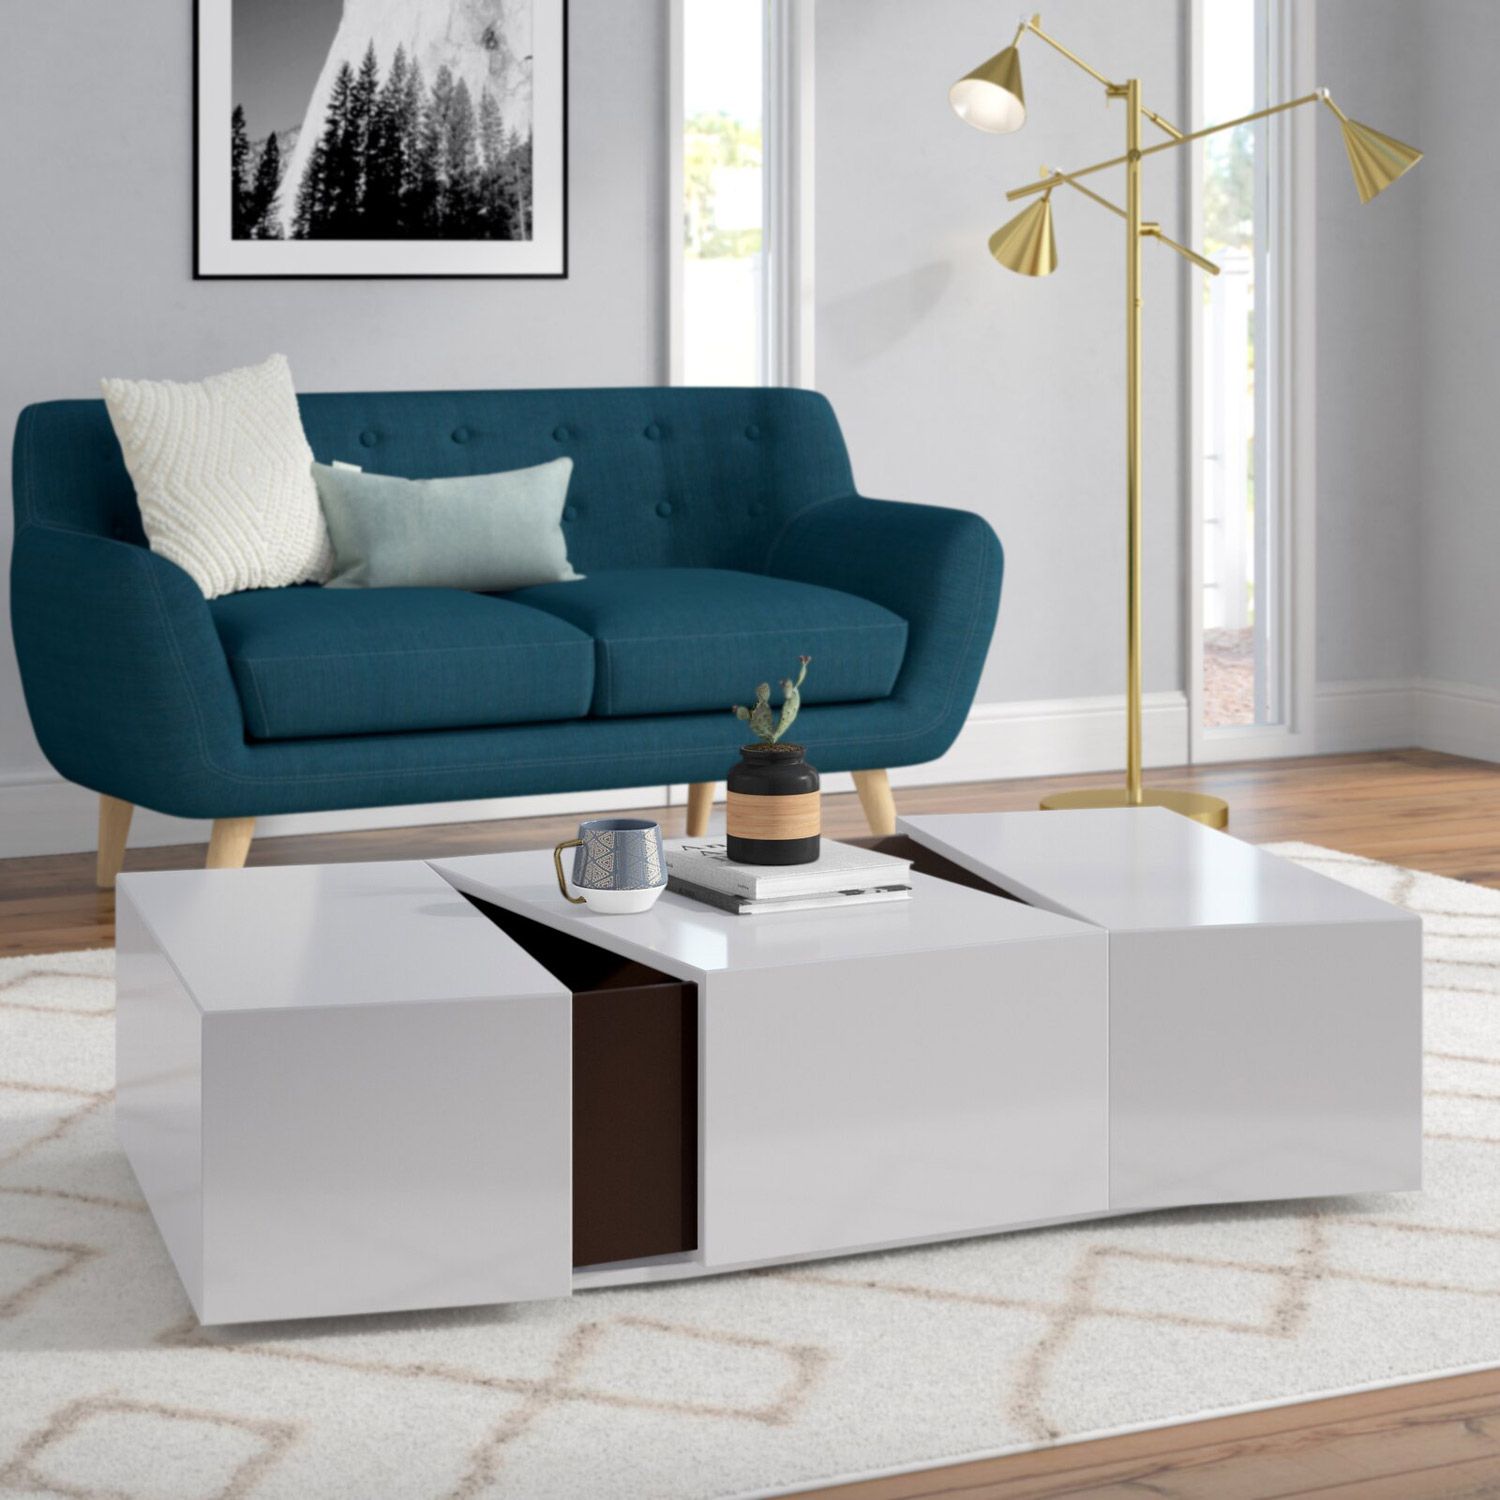 Sleek Modern Coffee Table With Hidden Storage | The Green Head Inside Modern Coffee Tables With Hidden Storage Compartments (View 2 of 20)